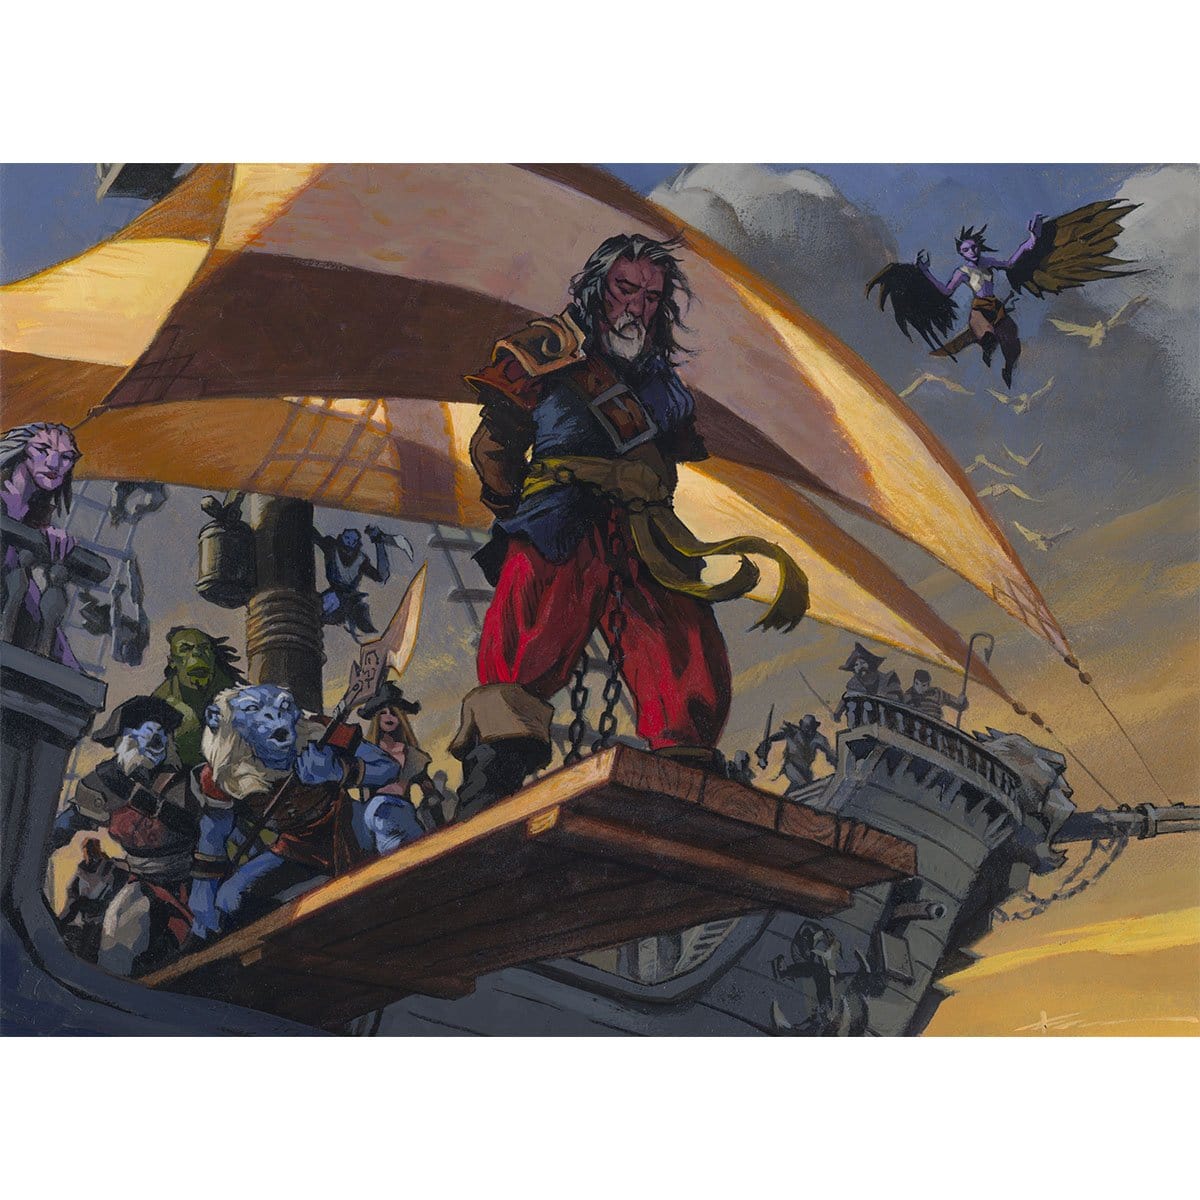 Walk the Plank Print - Print - Original Magic Art - Accessories for Magic the Gathering and other card games